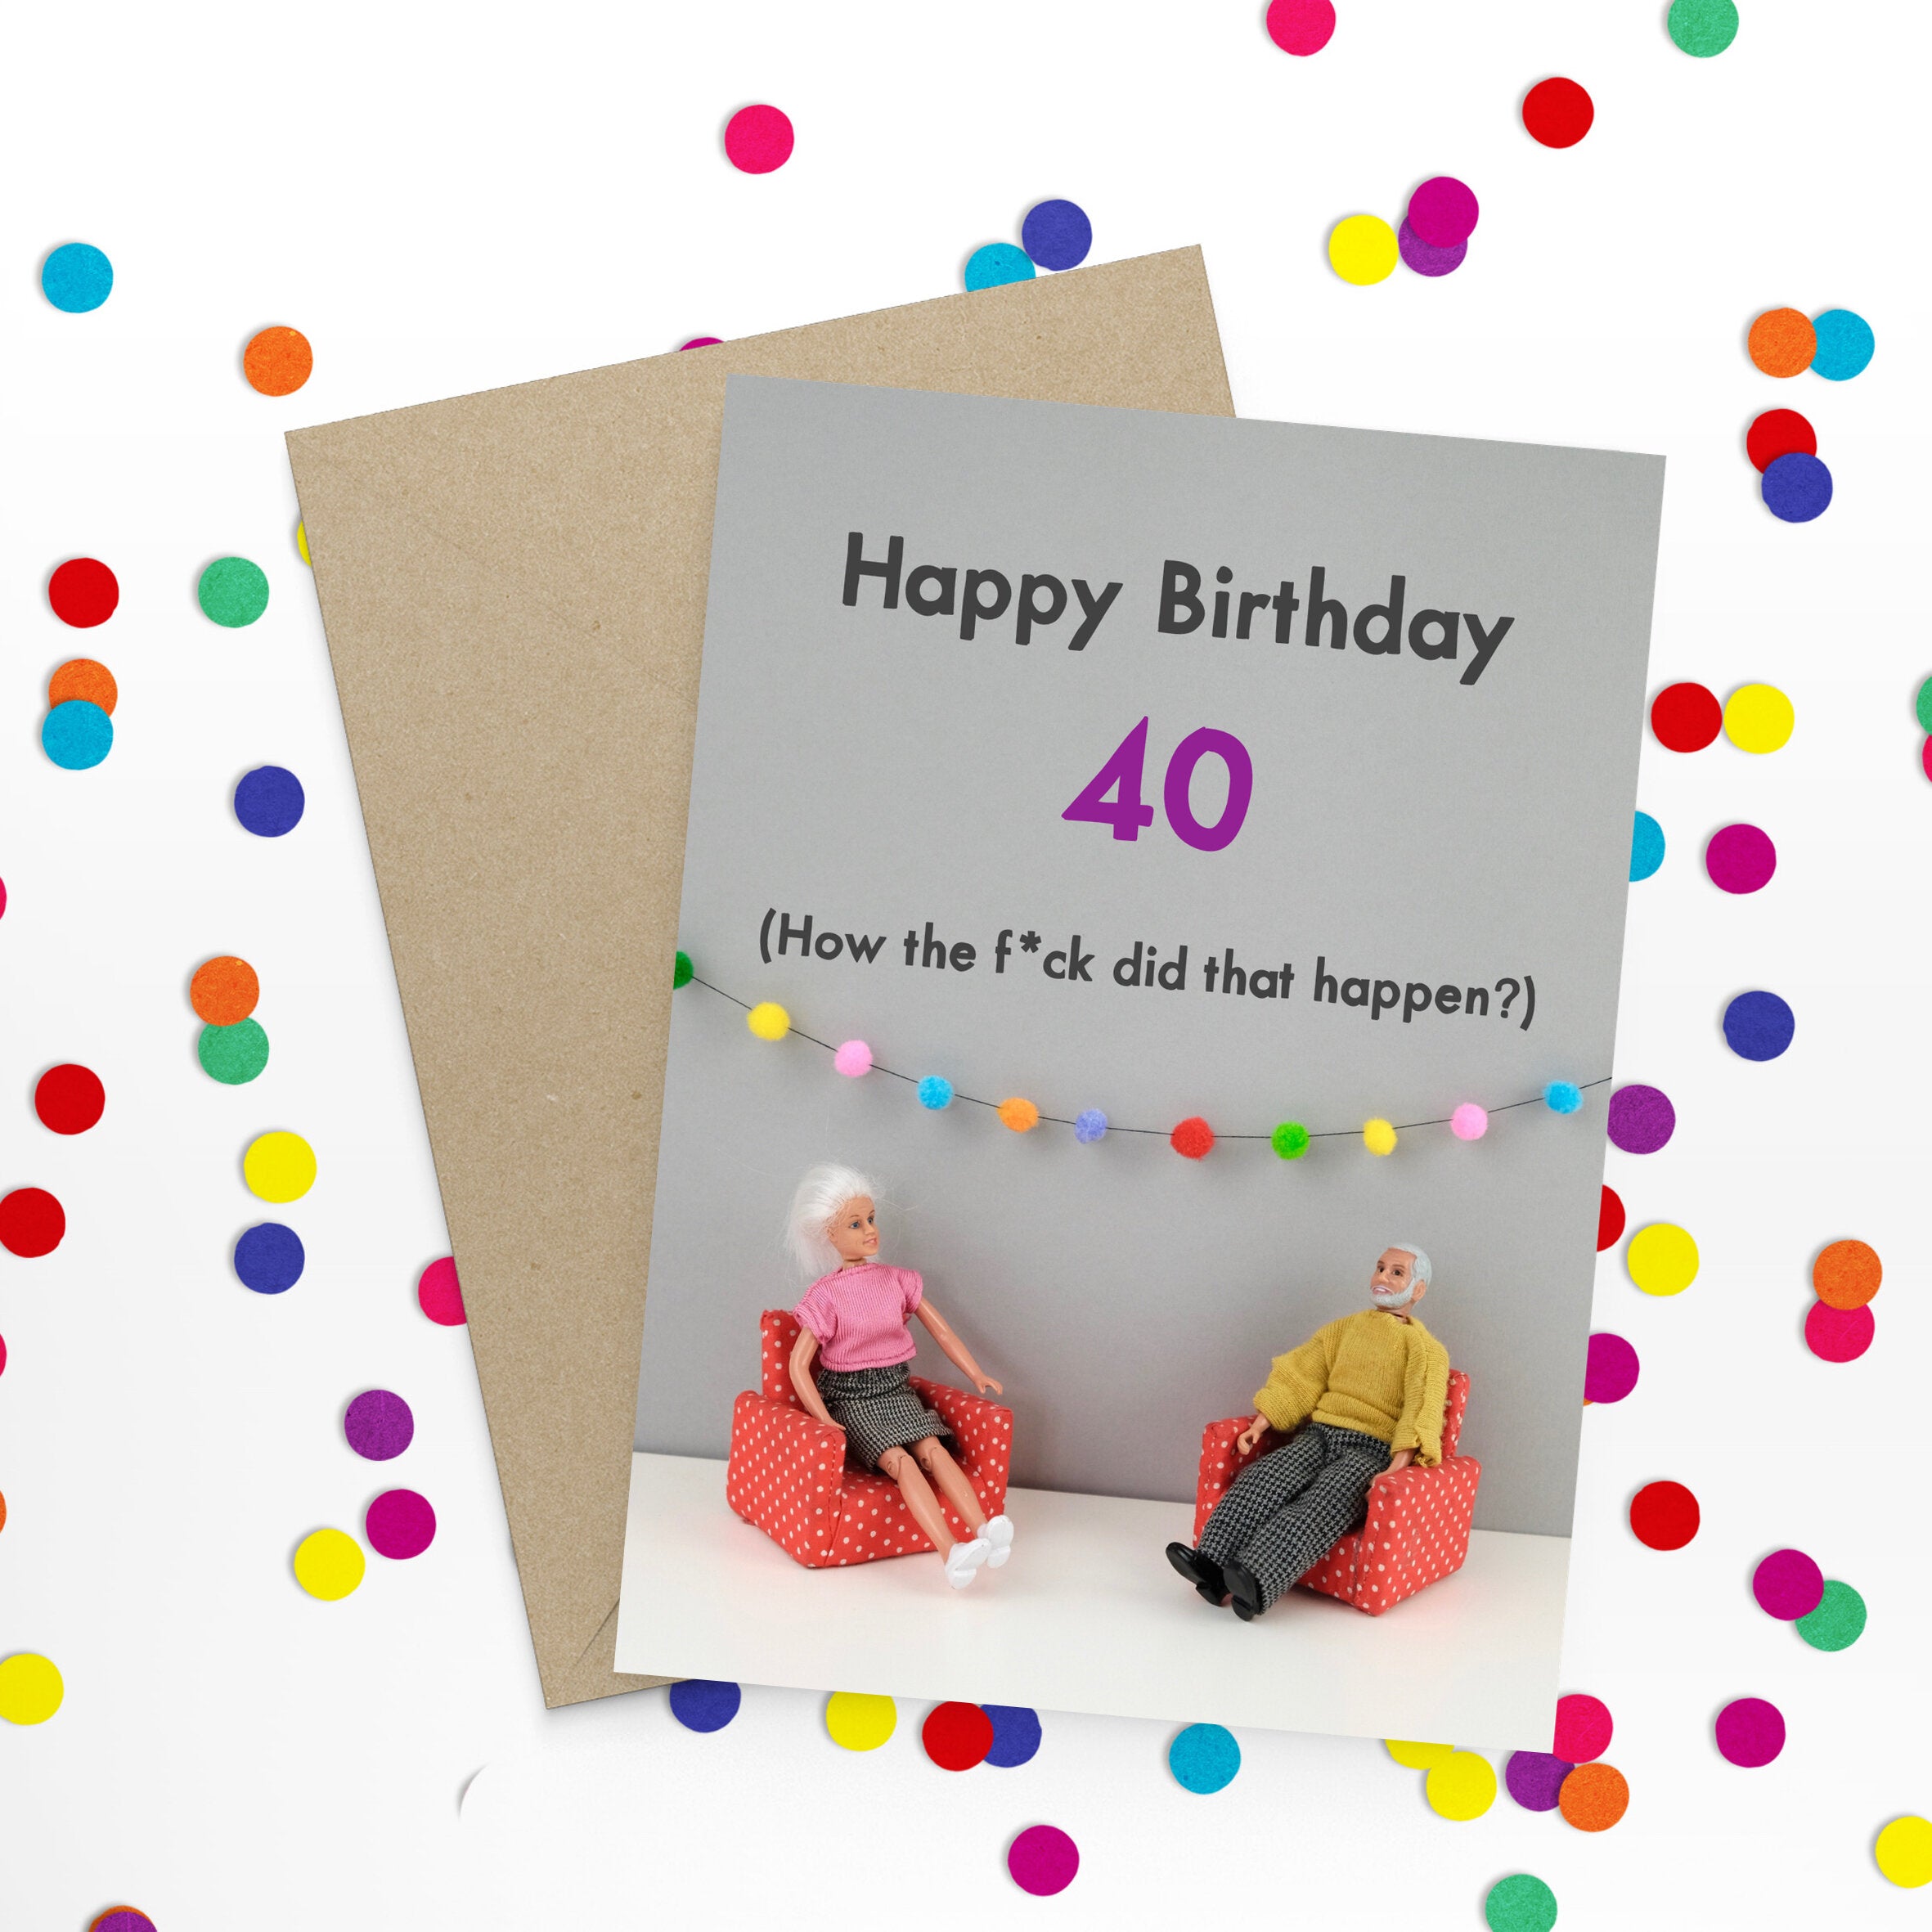 Happy birthday 40 (how the f*ck did that happen?) Greetings Card by Bold and Bright